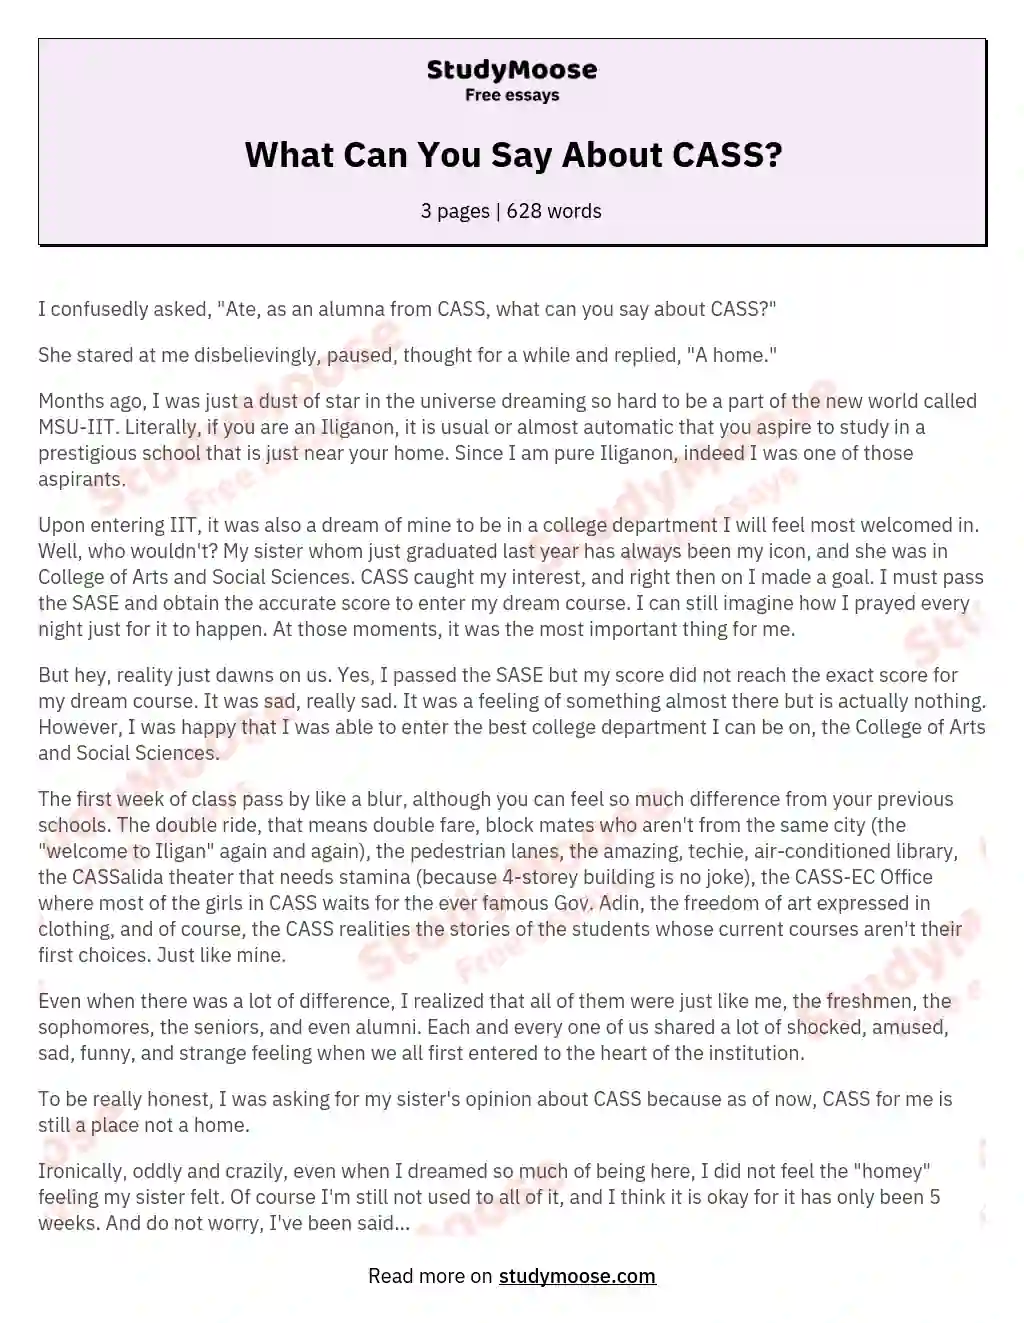 What Can You Say About CASS? essay